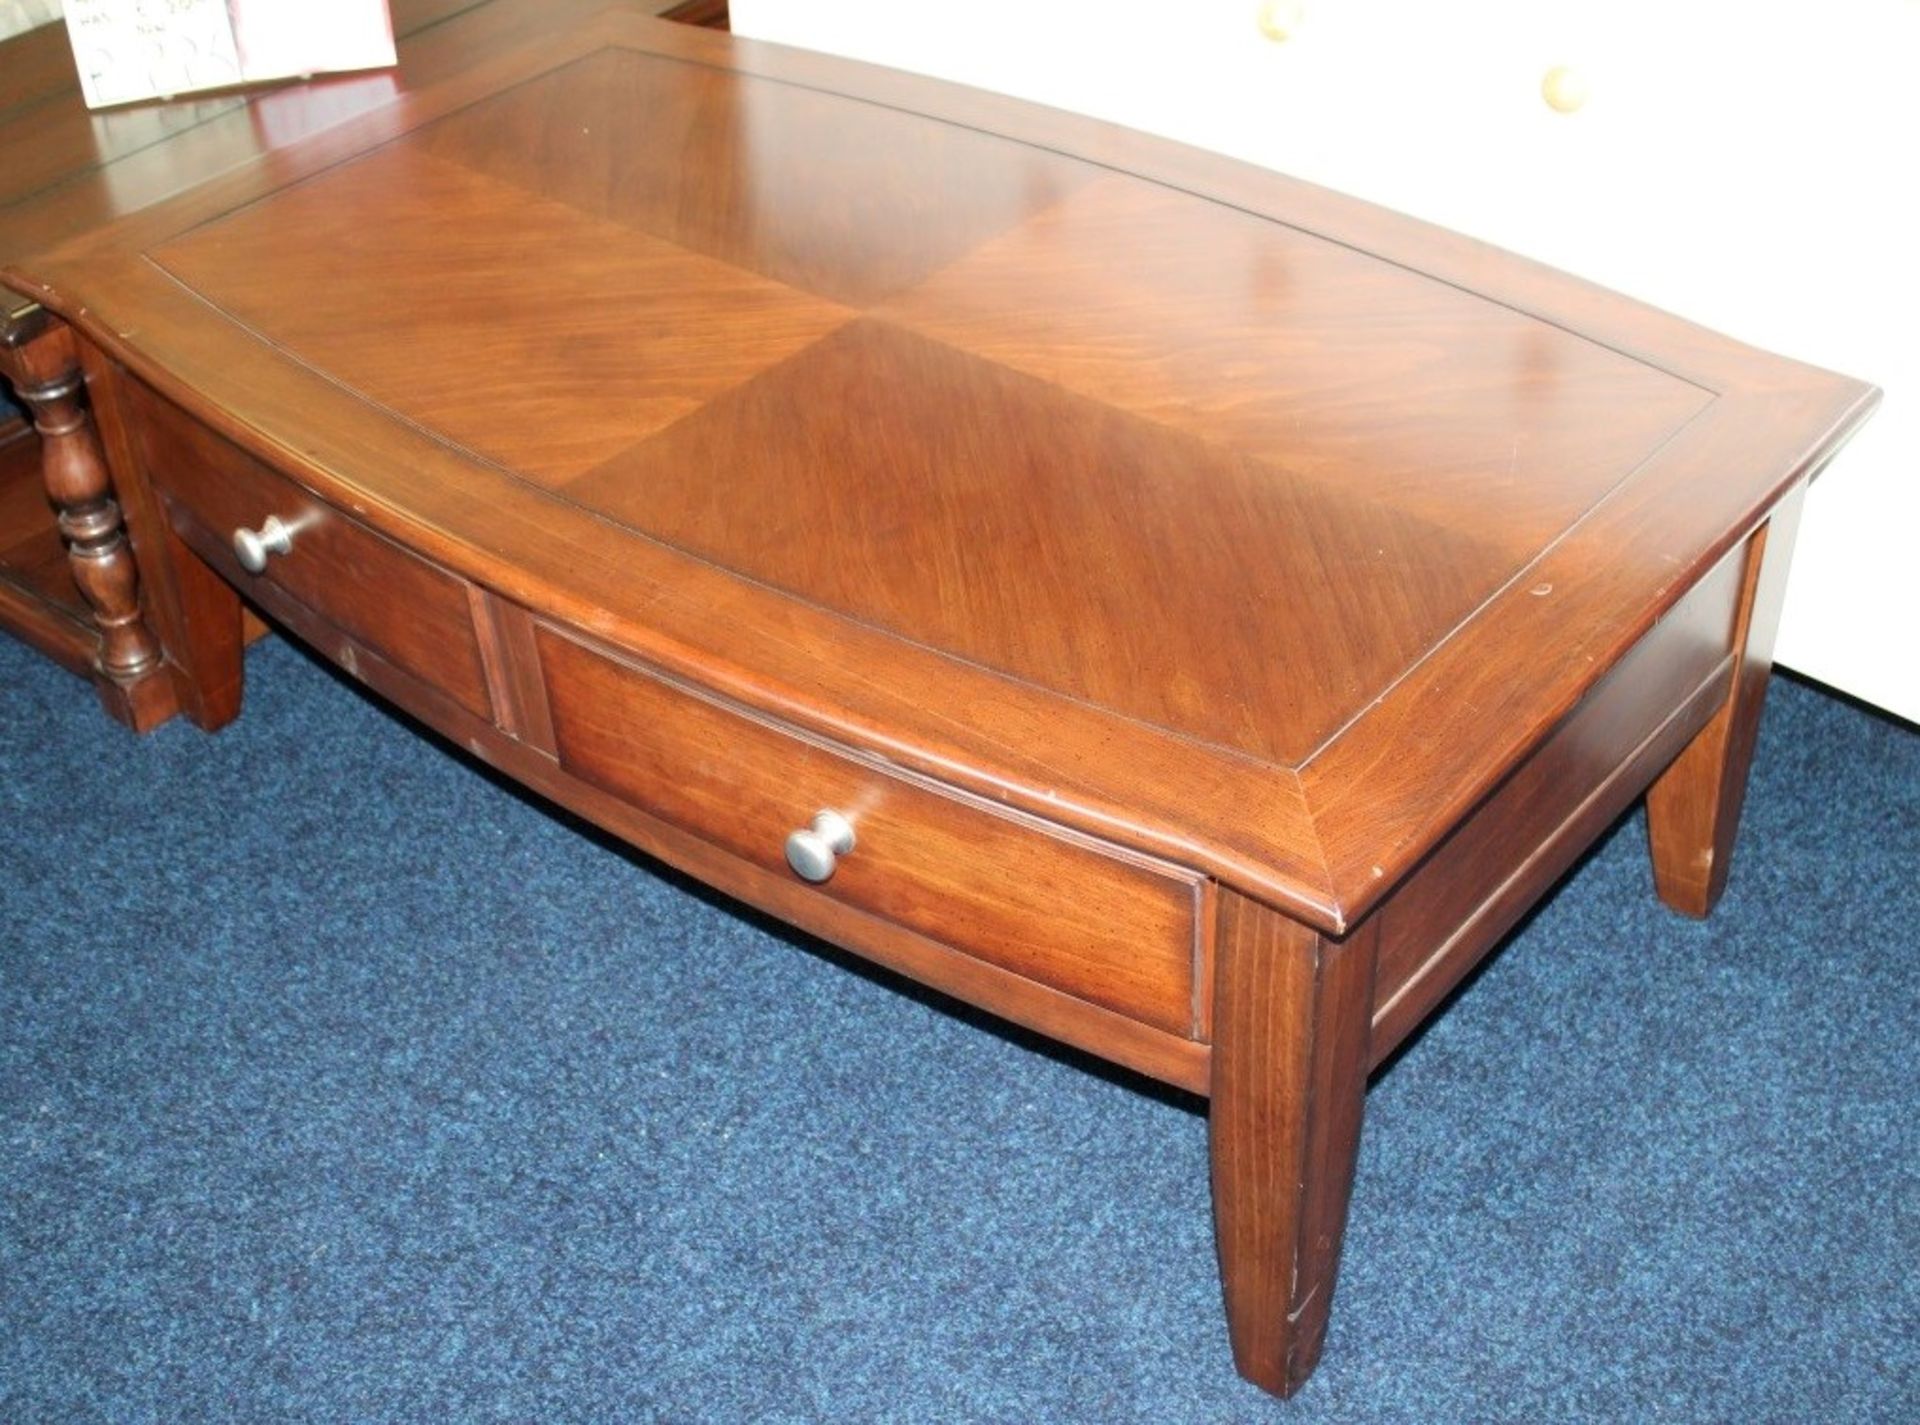 1 x Mark Webster 'Townsend' Dark Wood Coffee Table - 2 Drawer - Ex Display Stock With Light Wear (